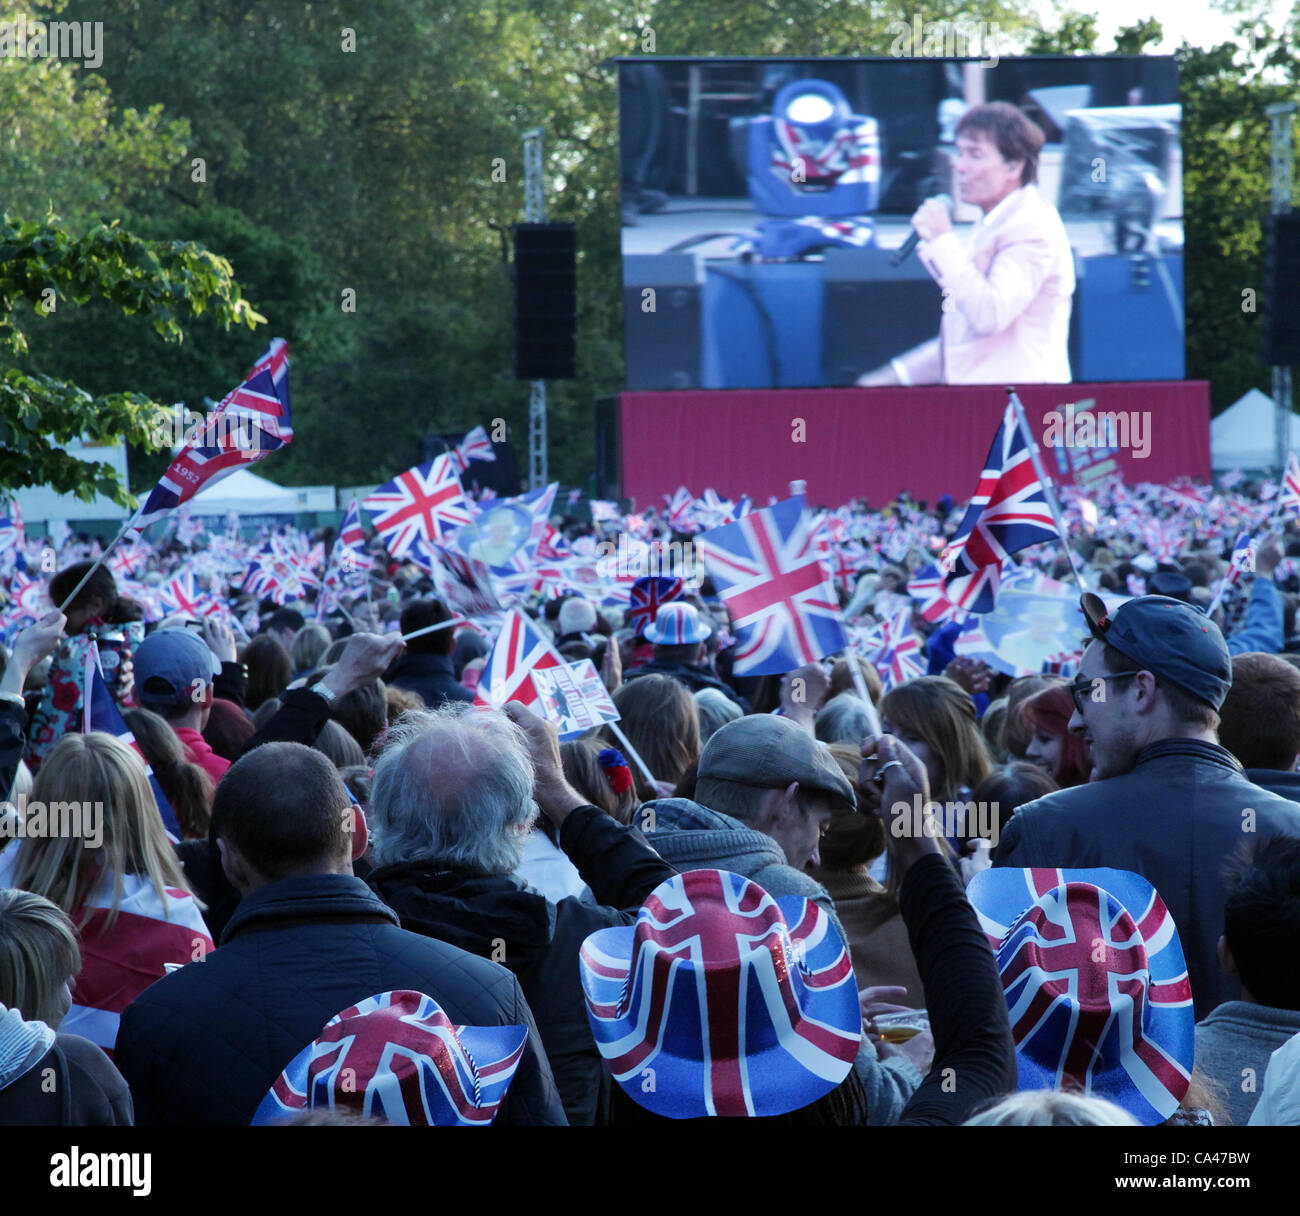 London, UK. June 4, 2012. Fans in London, enjoying Sir Cliff Richard on the big screen in St. james Park Concert to celebrate The Queen's Diamond Jubilee.  . Stock Photo